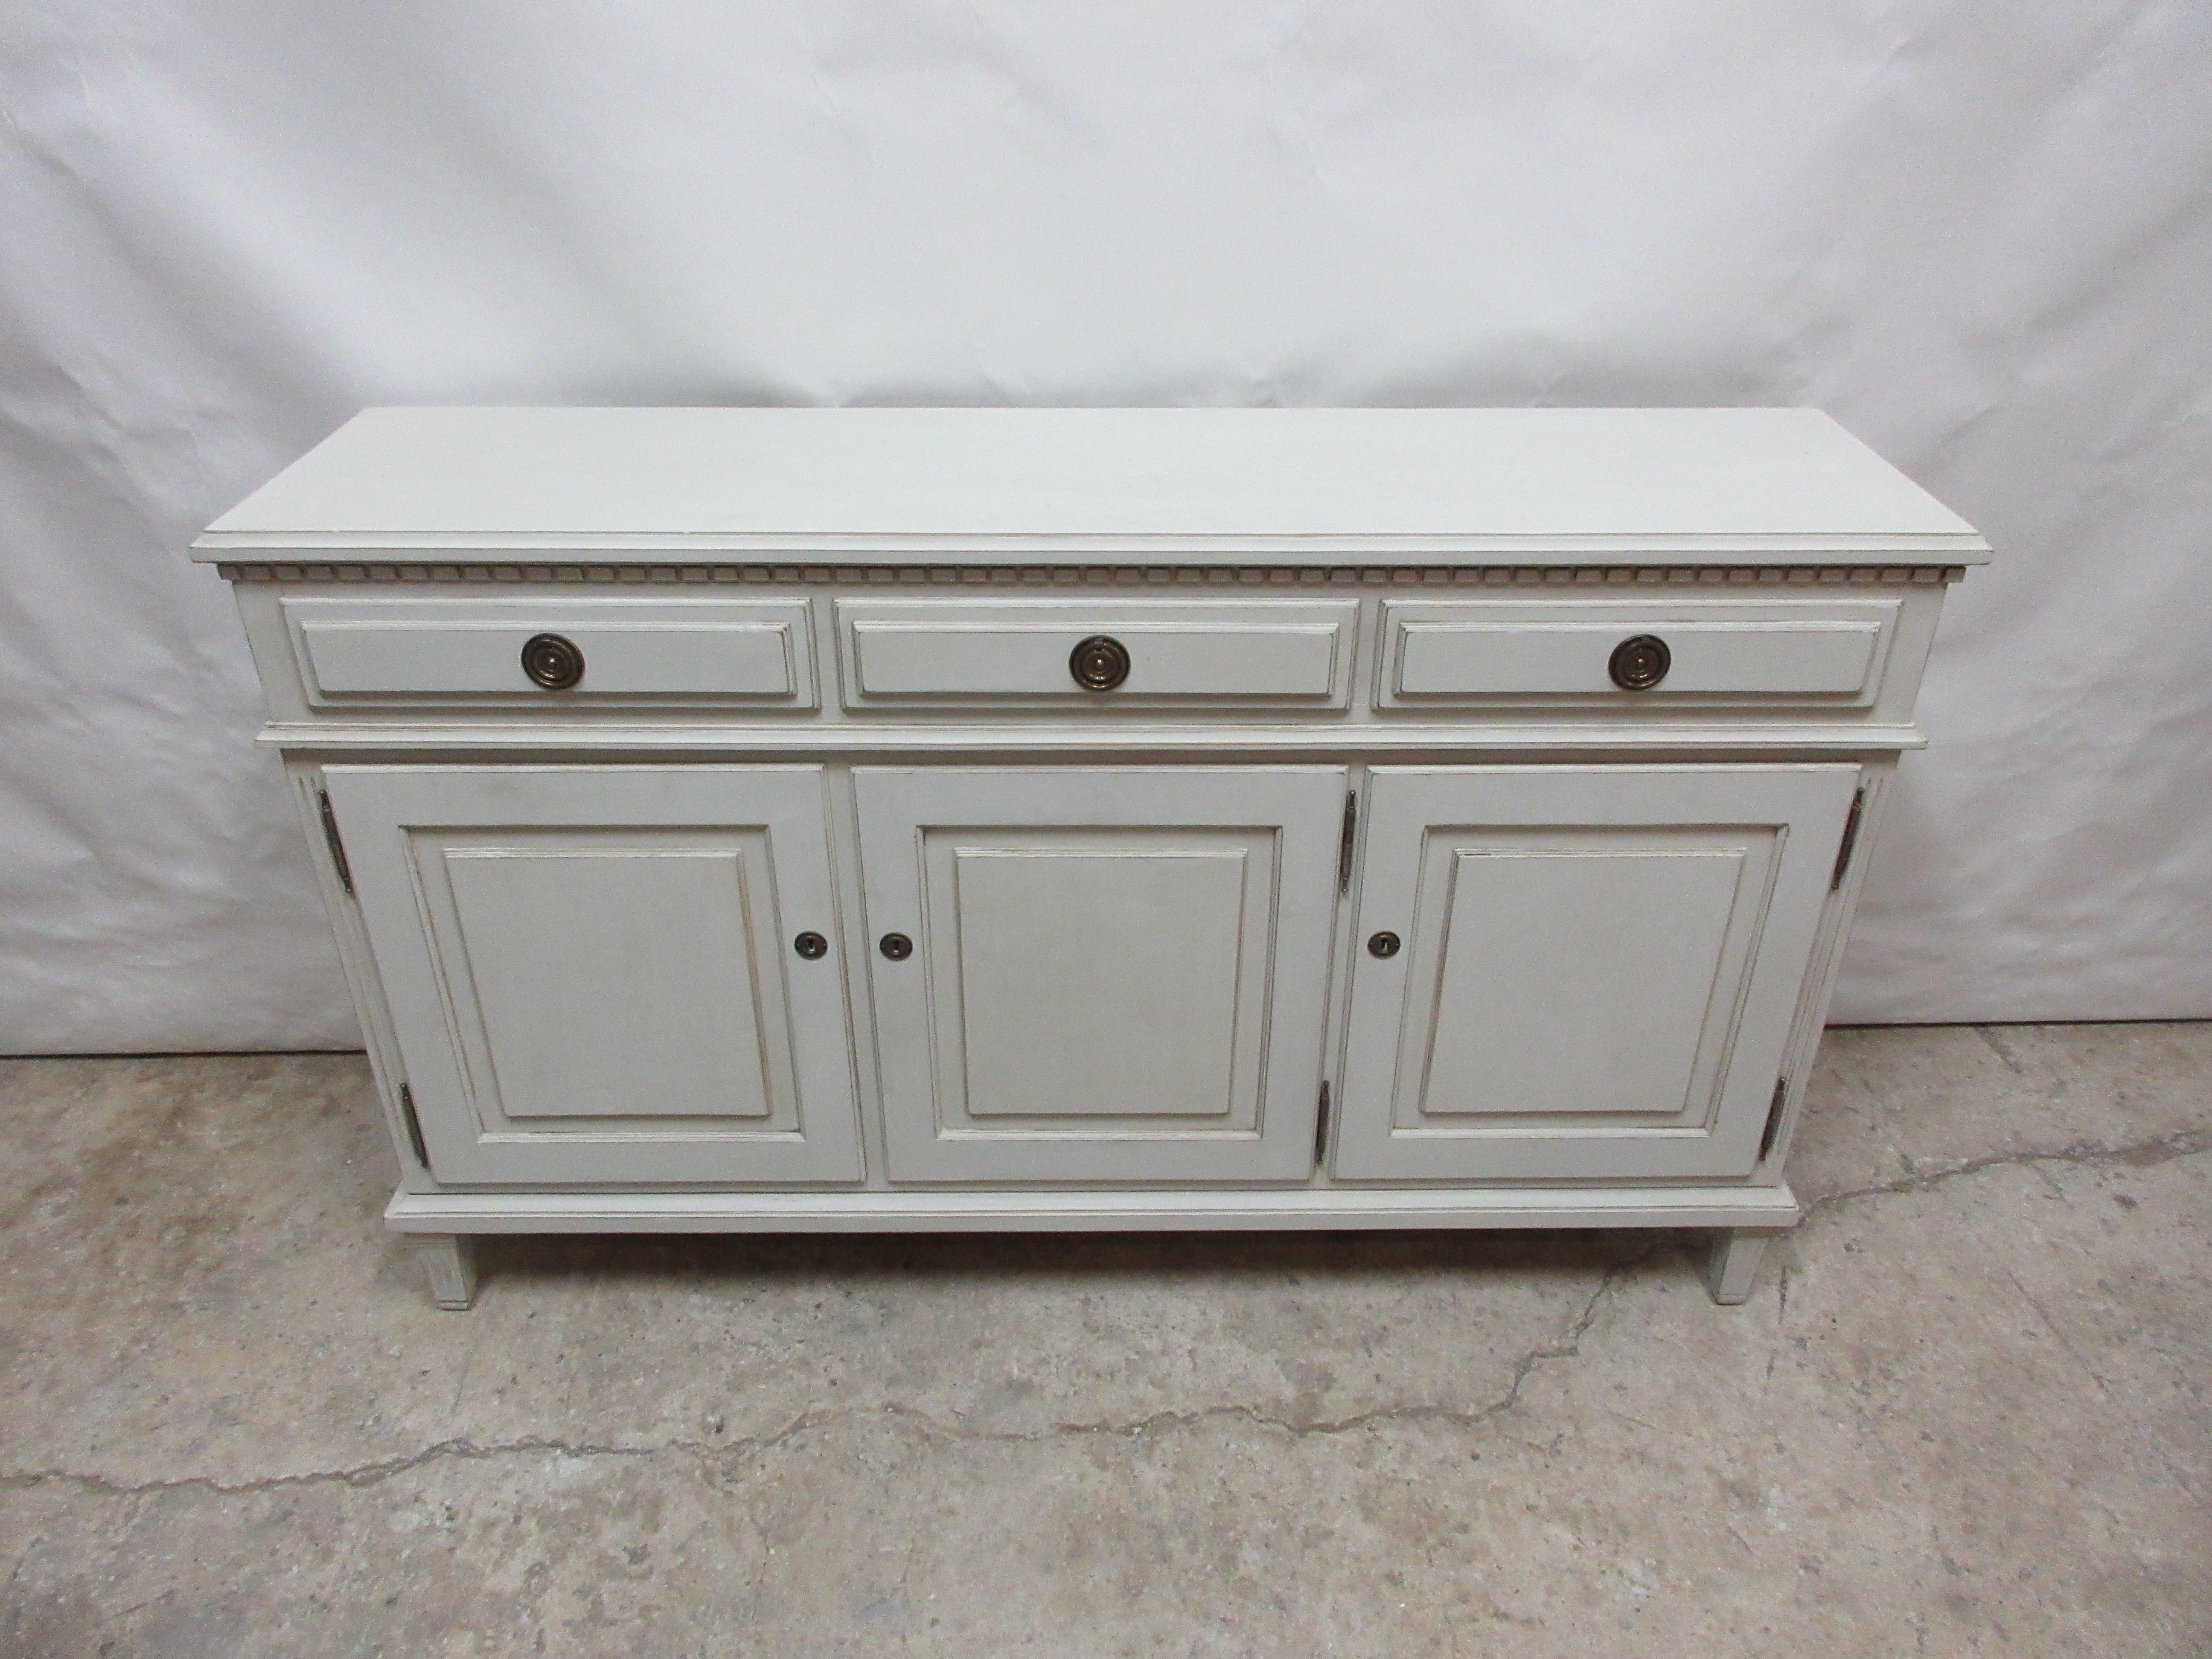 This Gustavian sideboard was found at an Estate Auction in Ratvik Sweden.
It has been restored and repainted in Milk Paints 